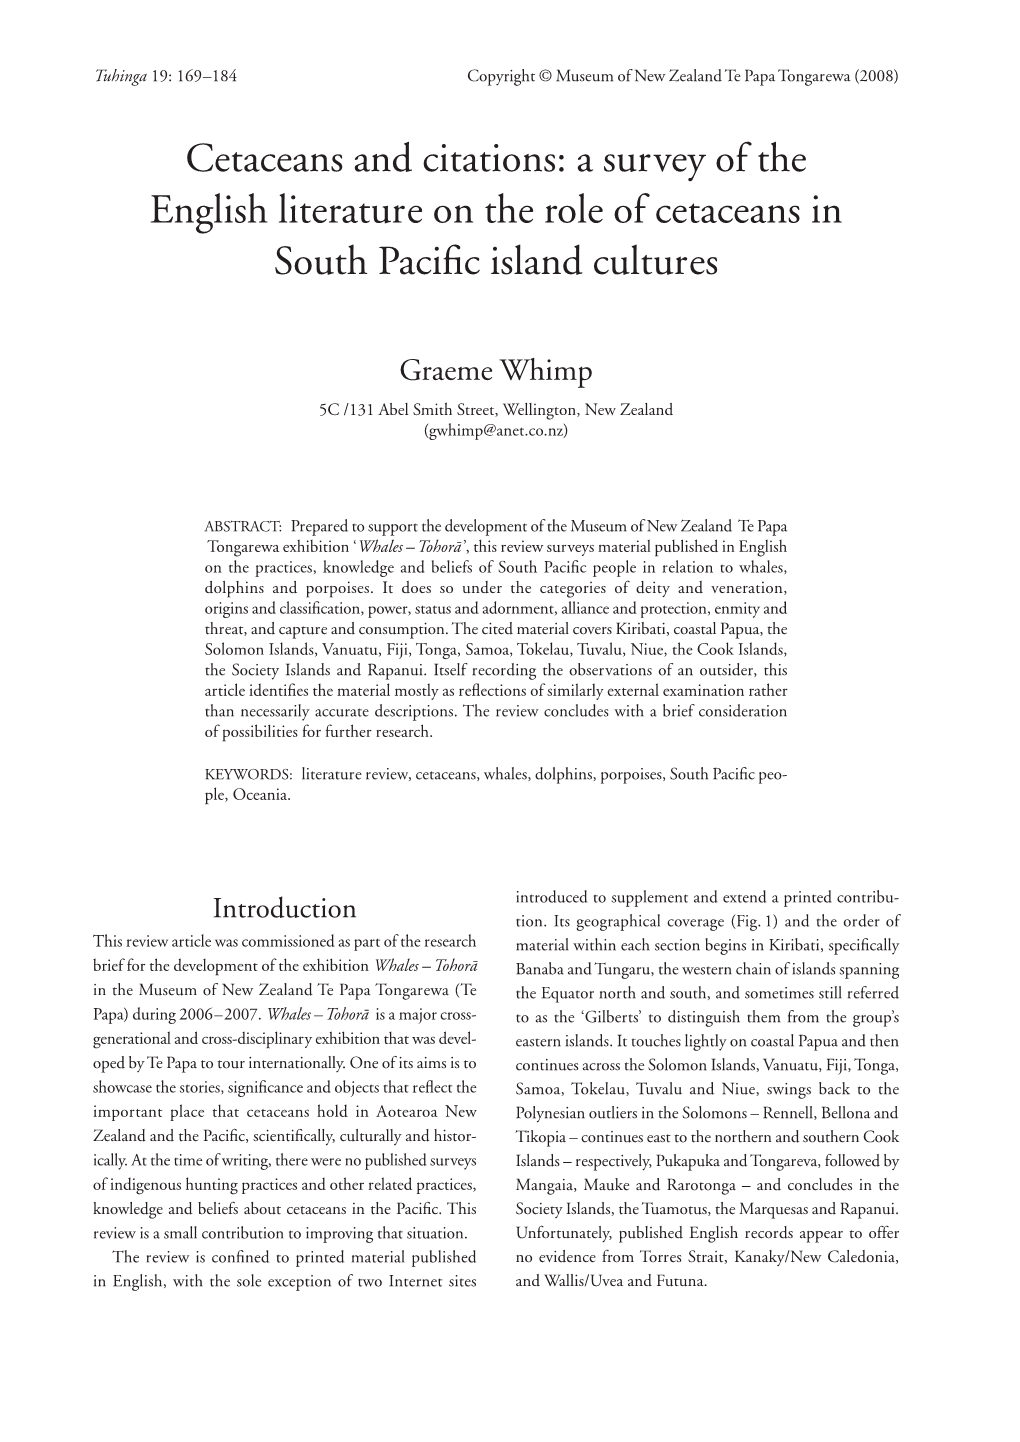 Cetaceans and Citations: a Survey of the English Literature on the Role of Cetaceans in South Paciﬁc Island Cultures